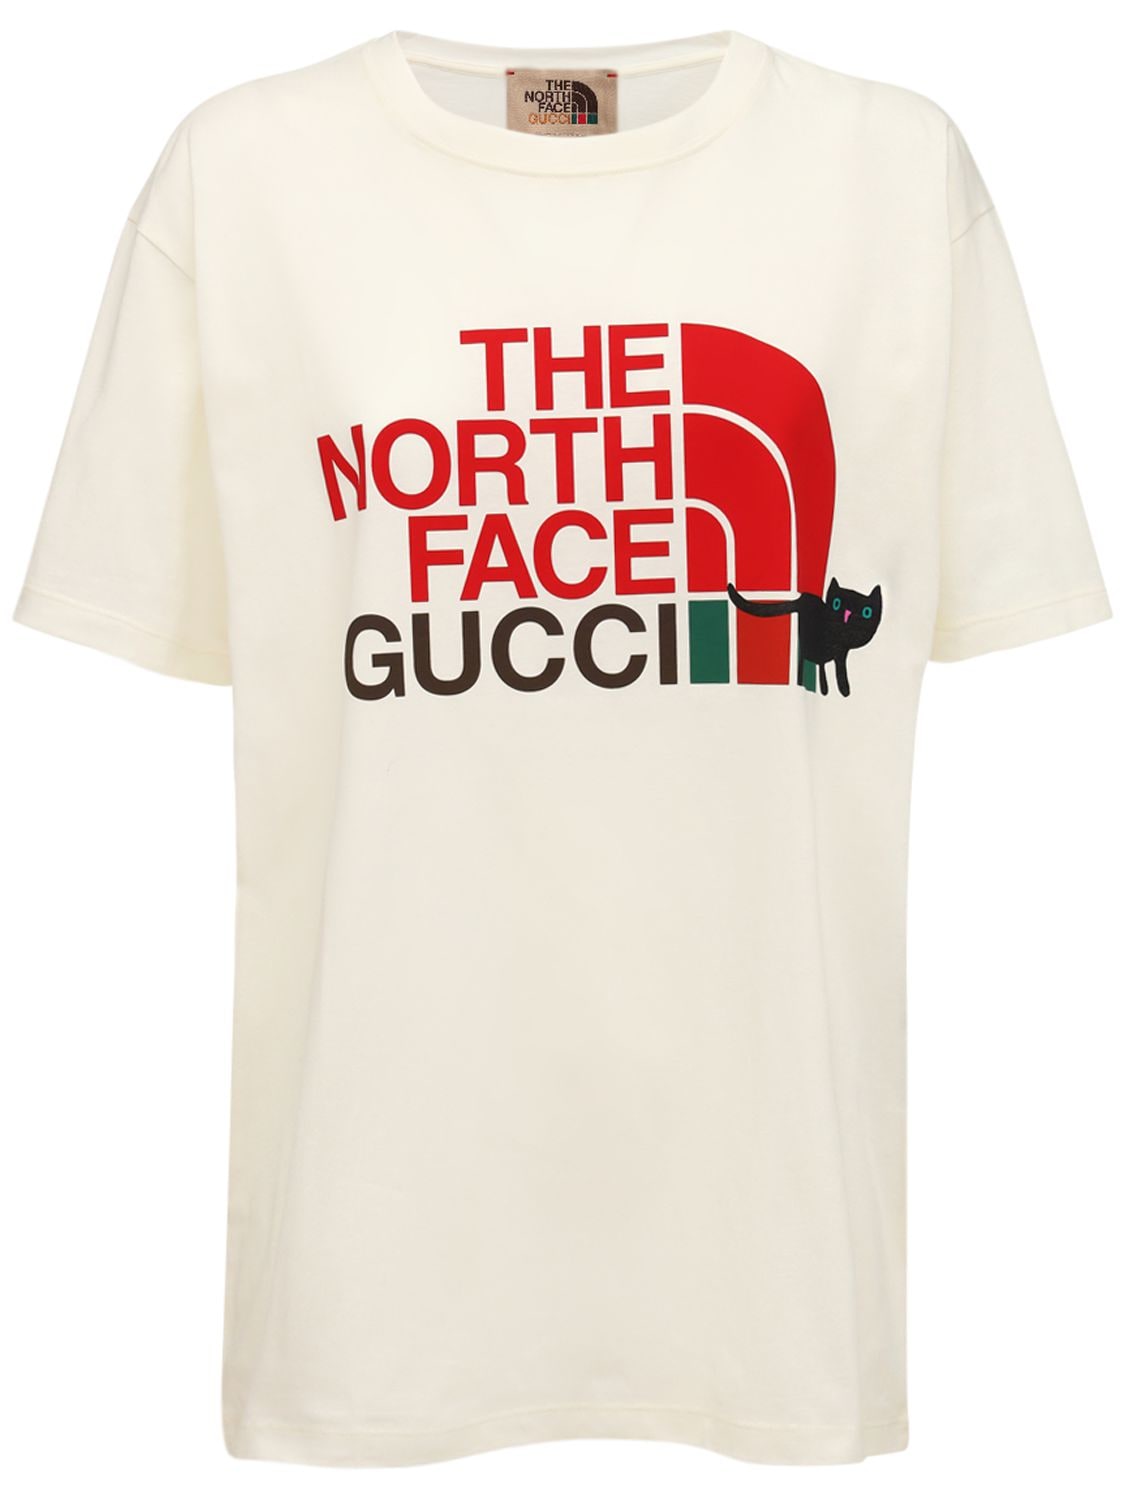 The North Face Printed Cotton T-shirt